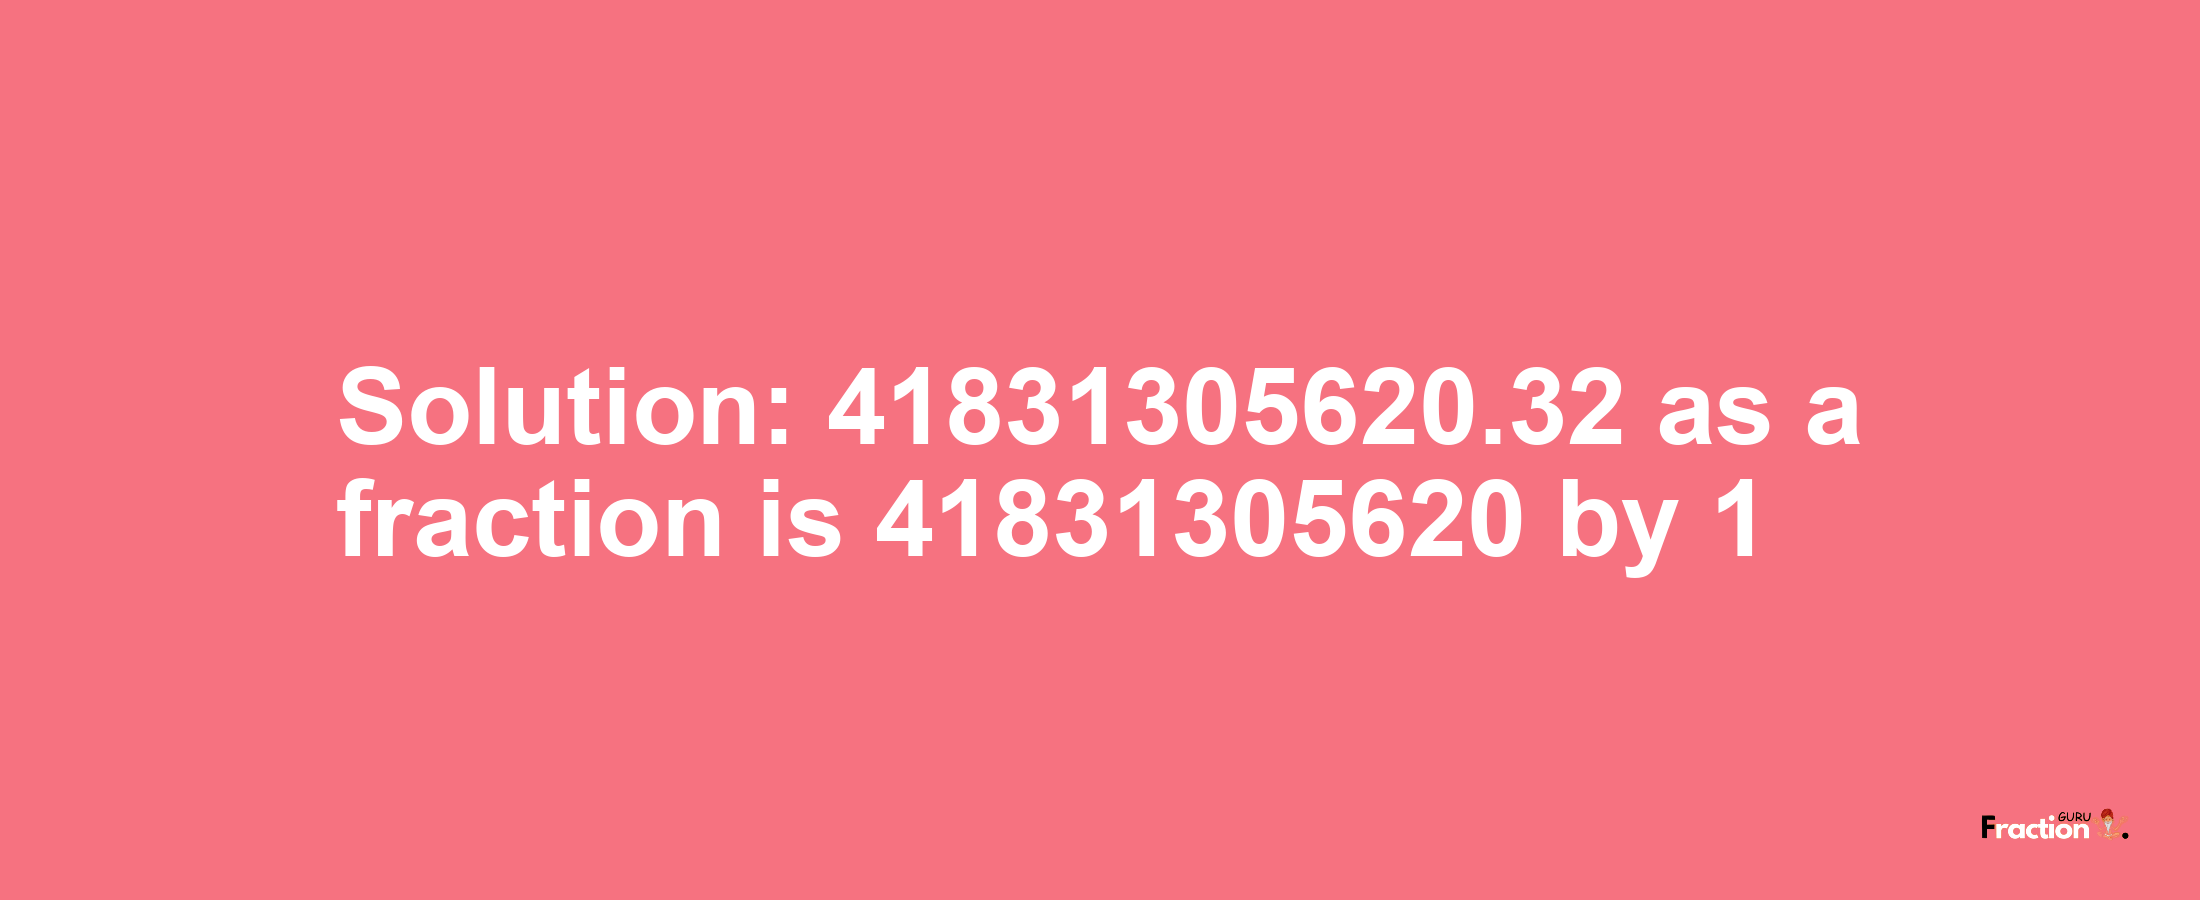 Solution:41831305620.32 as a fraction is 41831305620/1